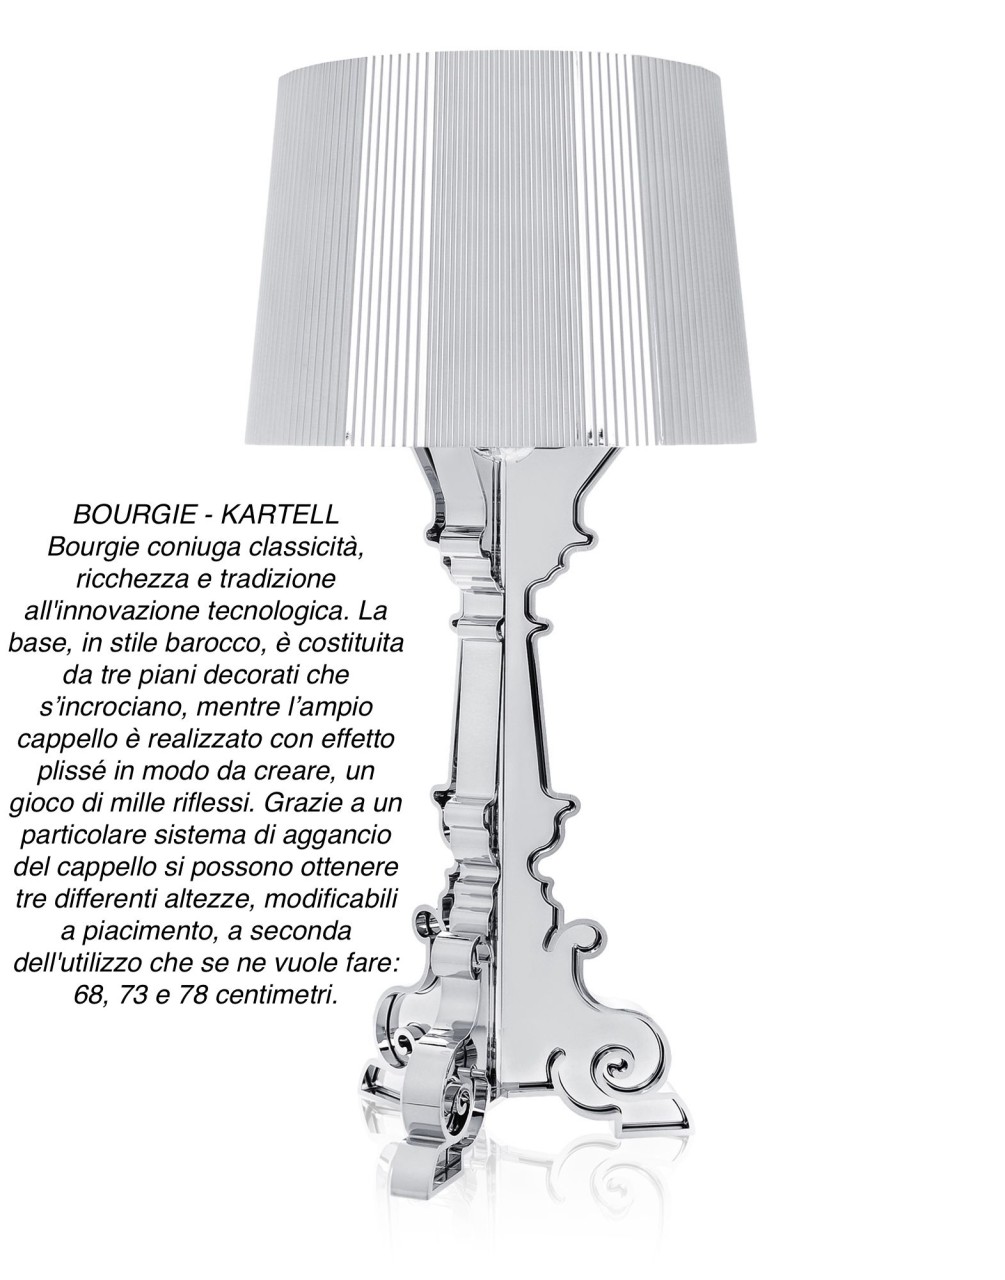 Bourgie - Kartell